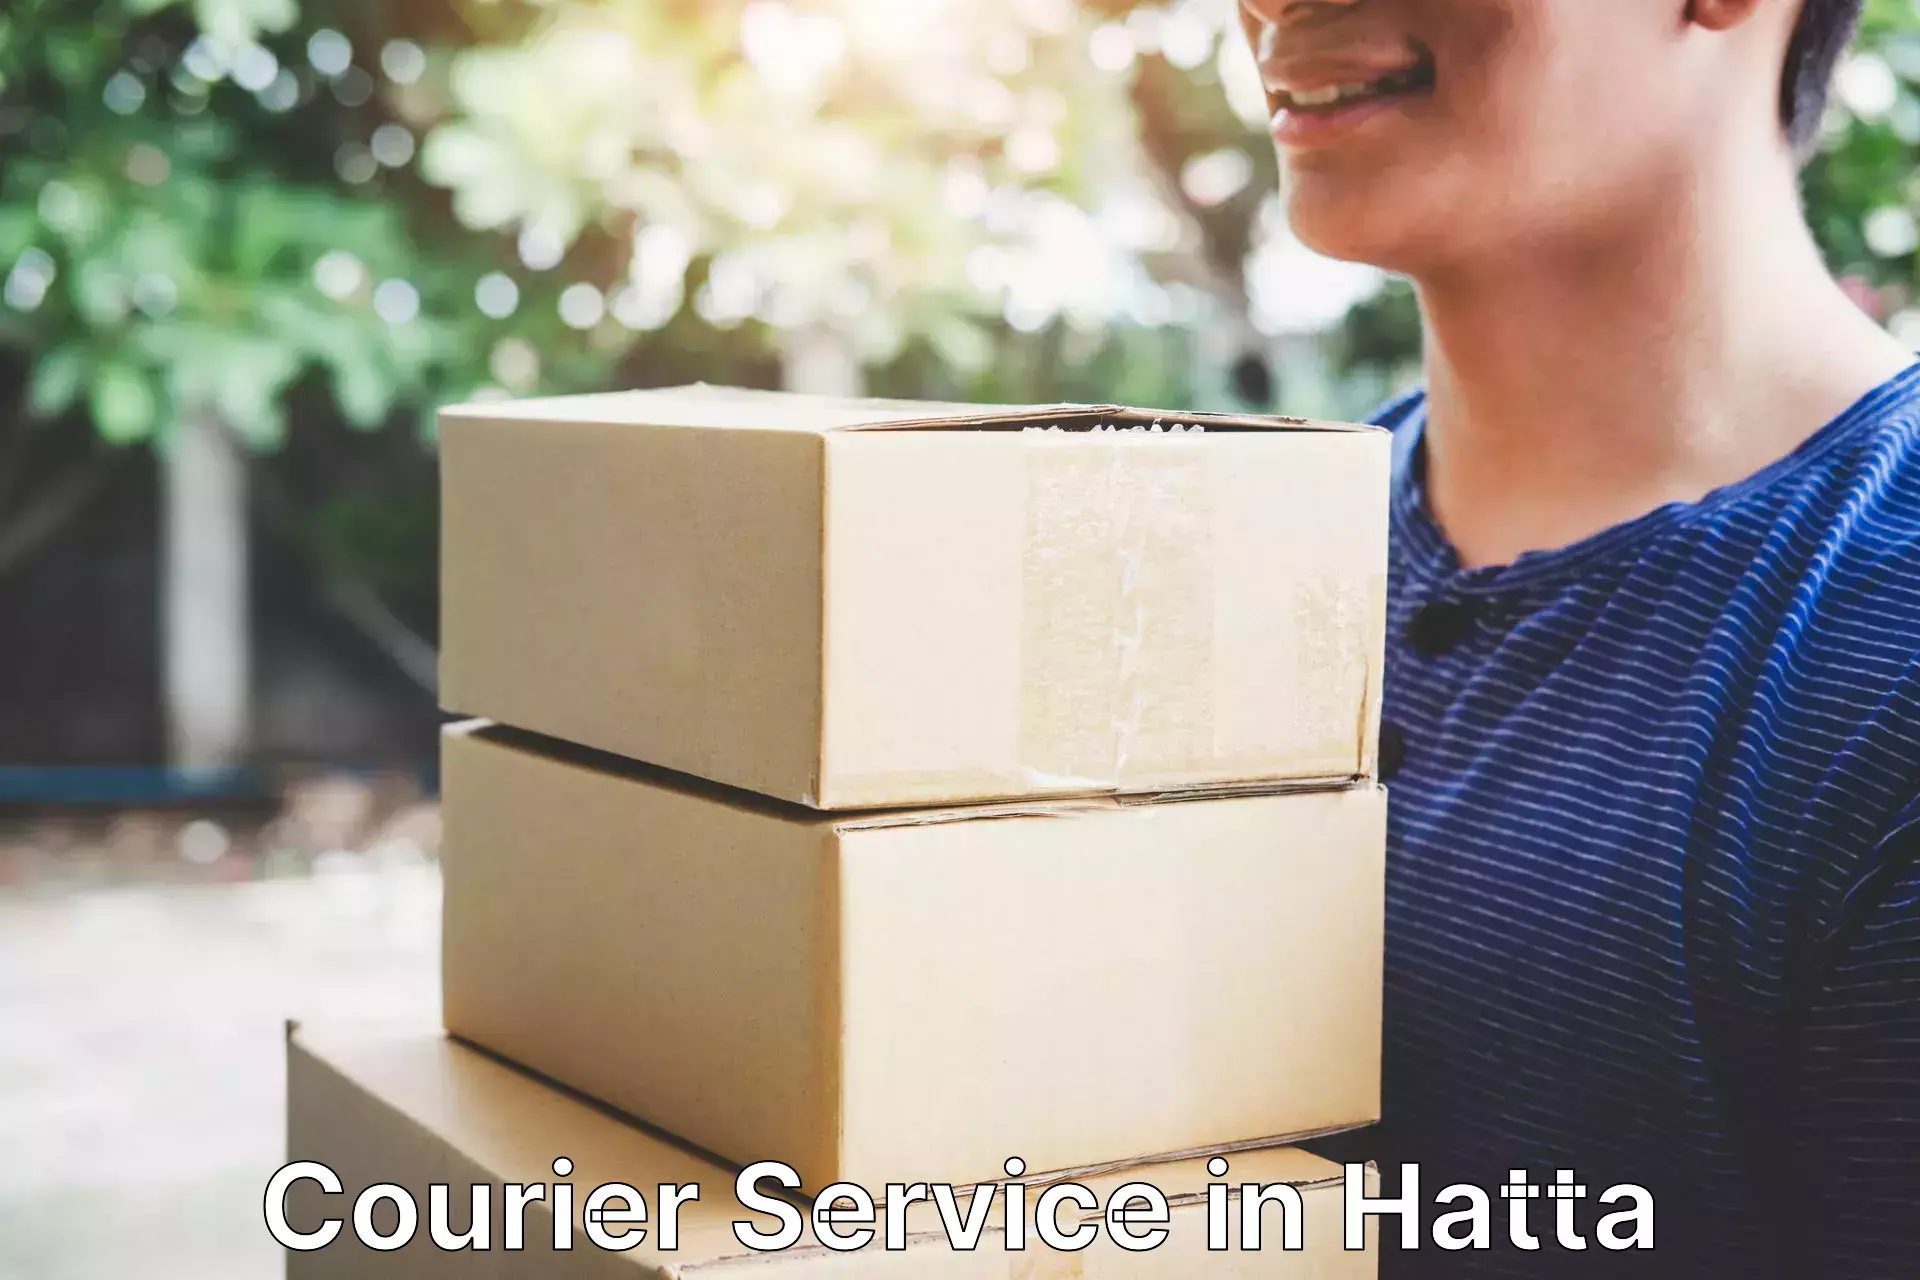 Tech-enabled shipping in Hatta